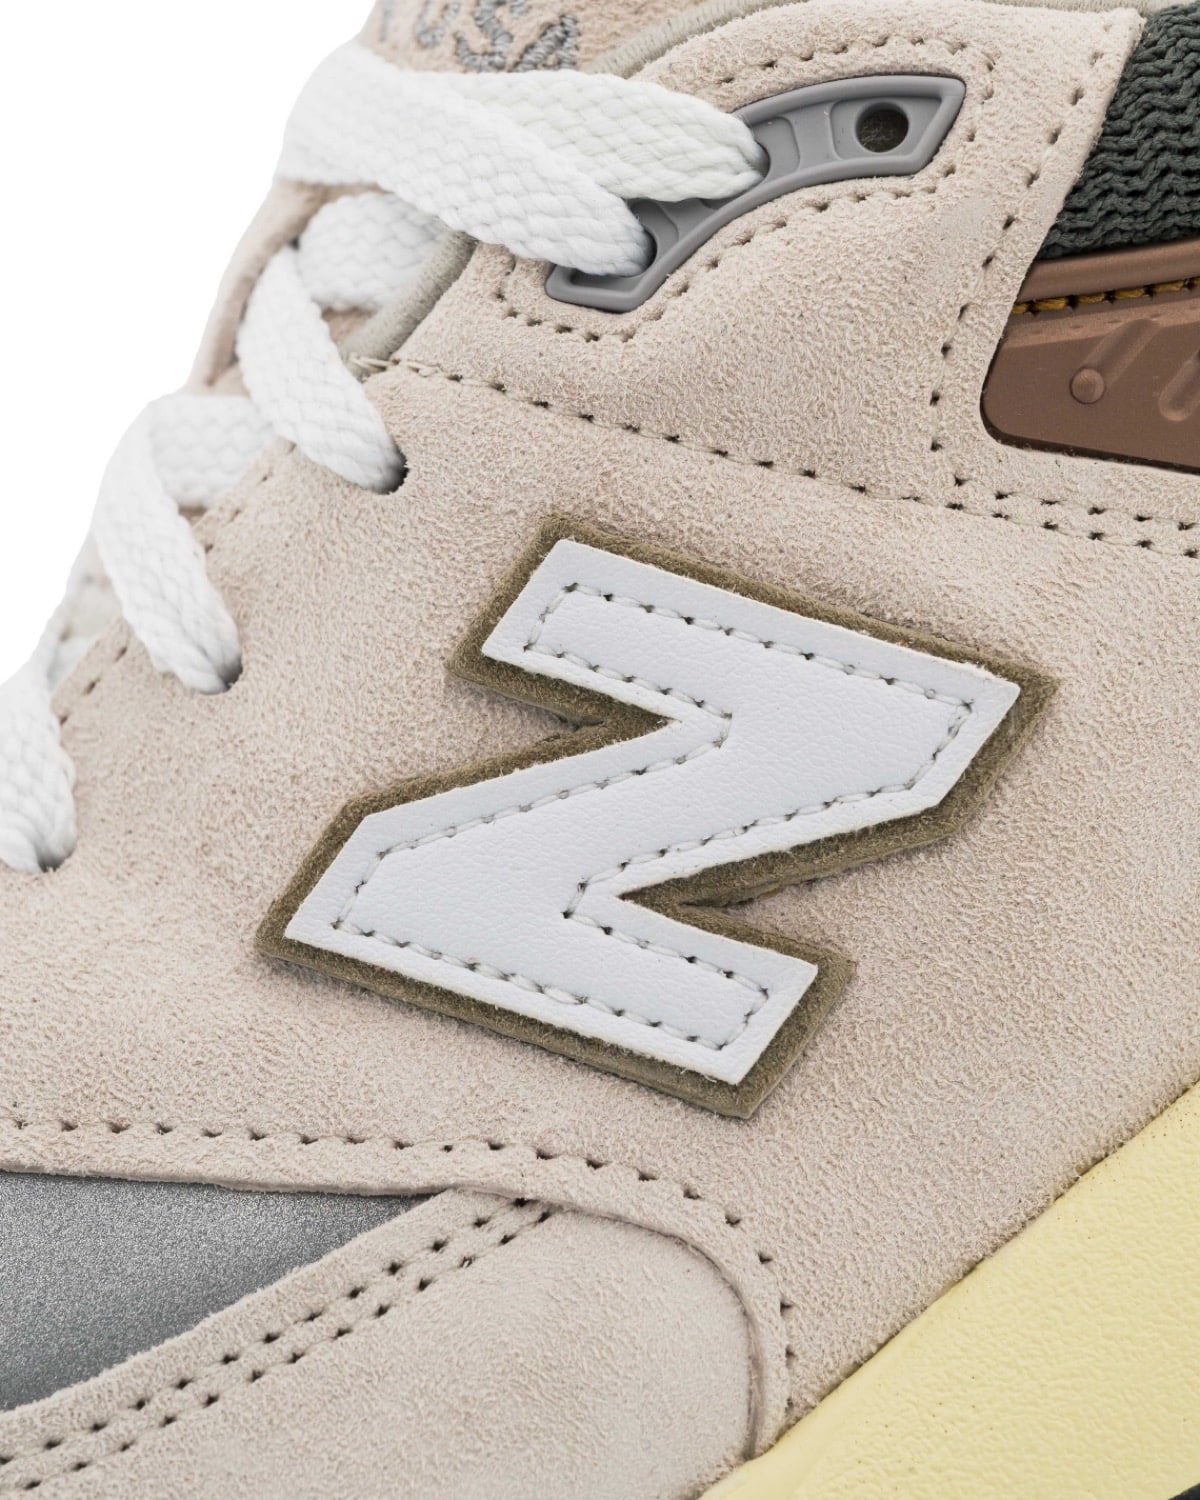 Concepts x New Balance 998 C-Note MADE in USA 10th Anniversary 9